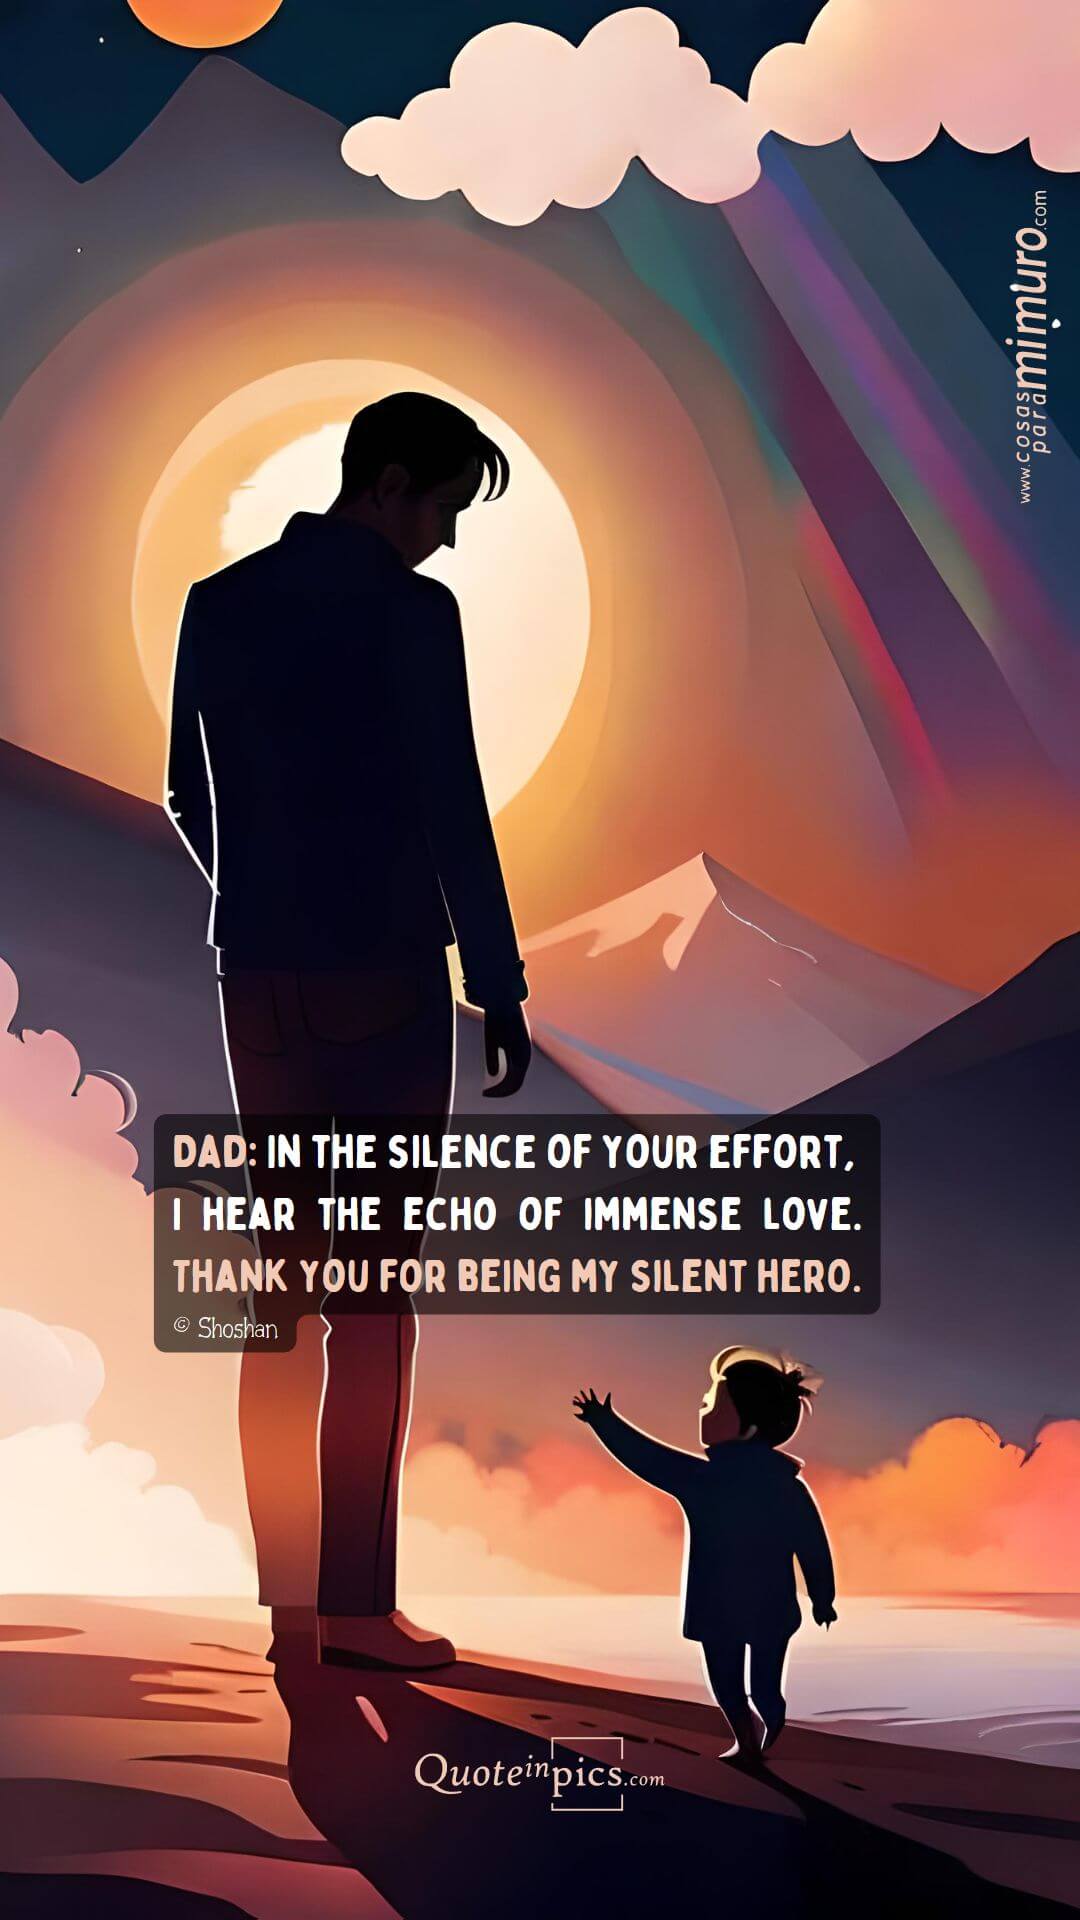 Dad: In the silence of your effort, I hear the echo of immense love